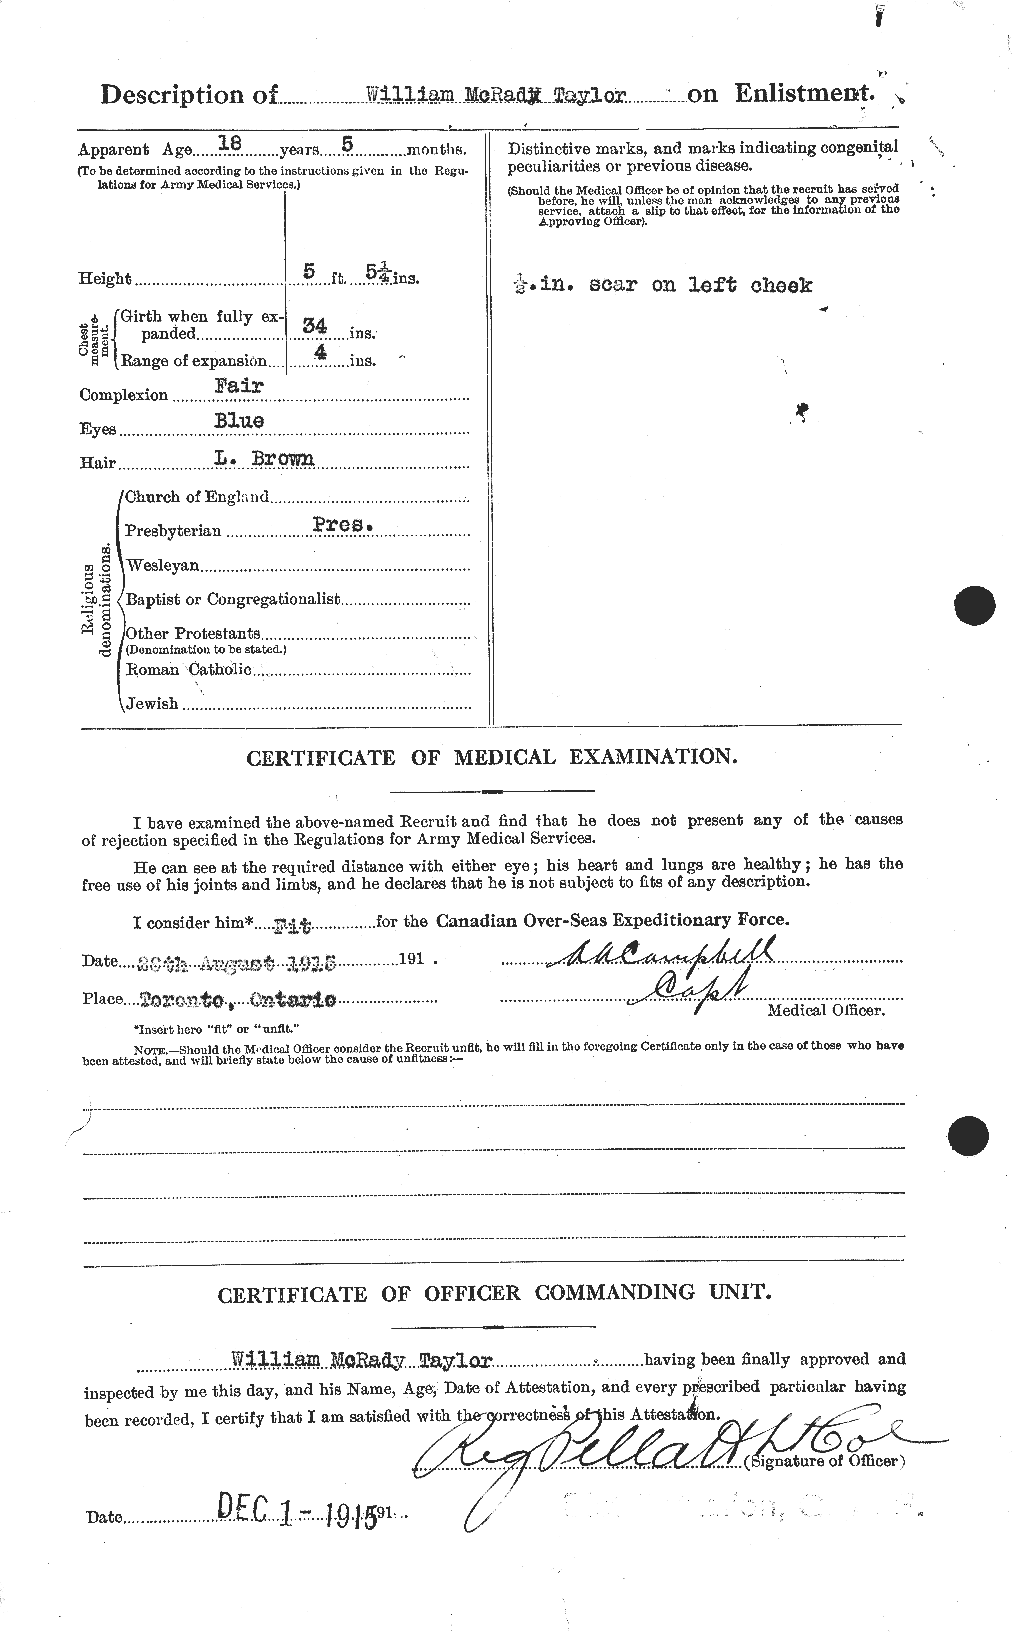 Personnel Records of the First World War - CEF 628328b